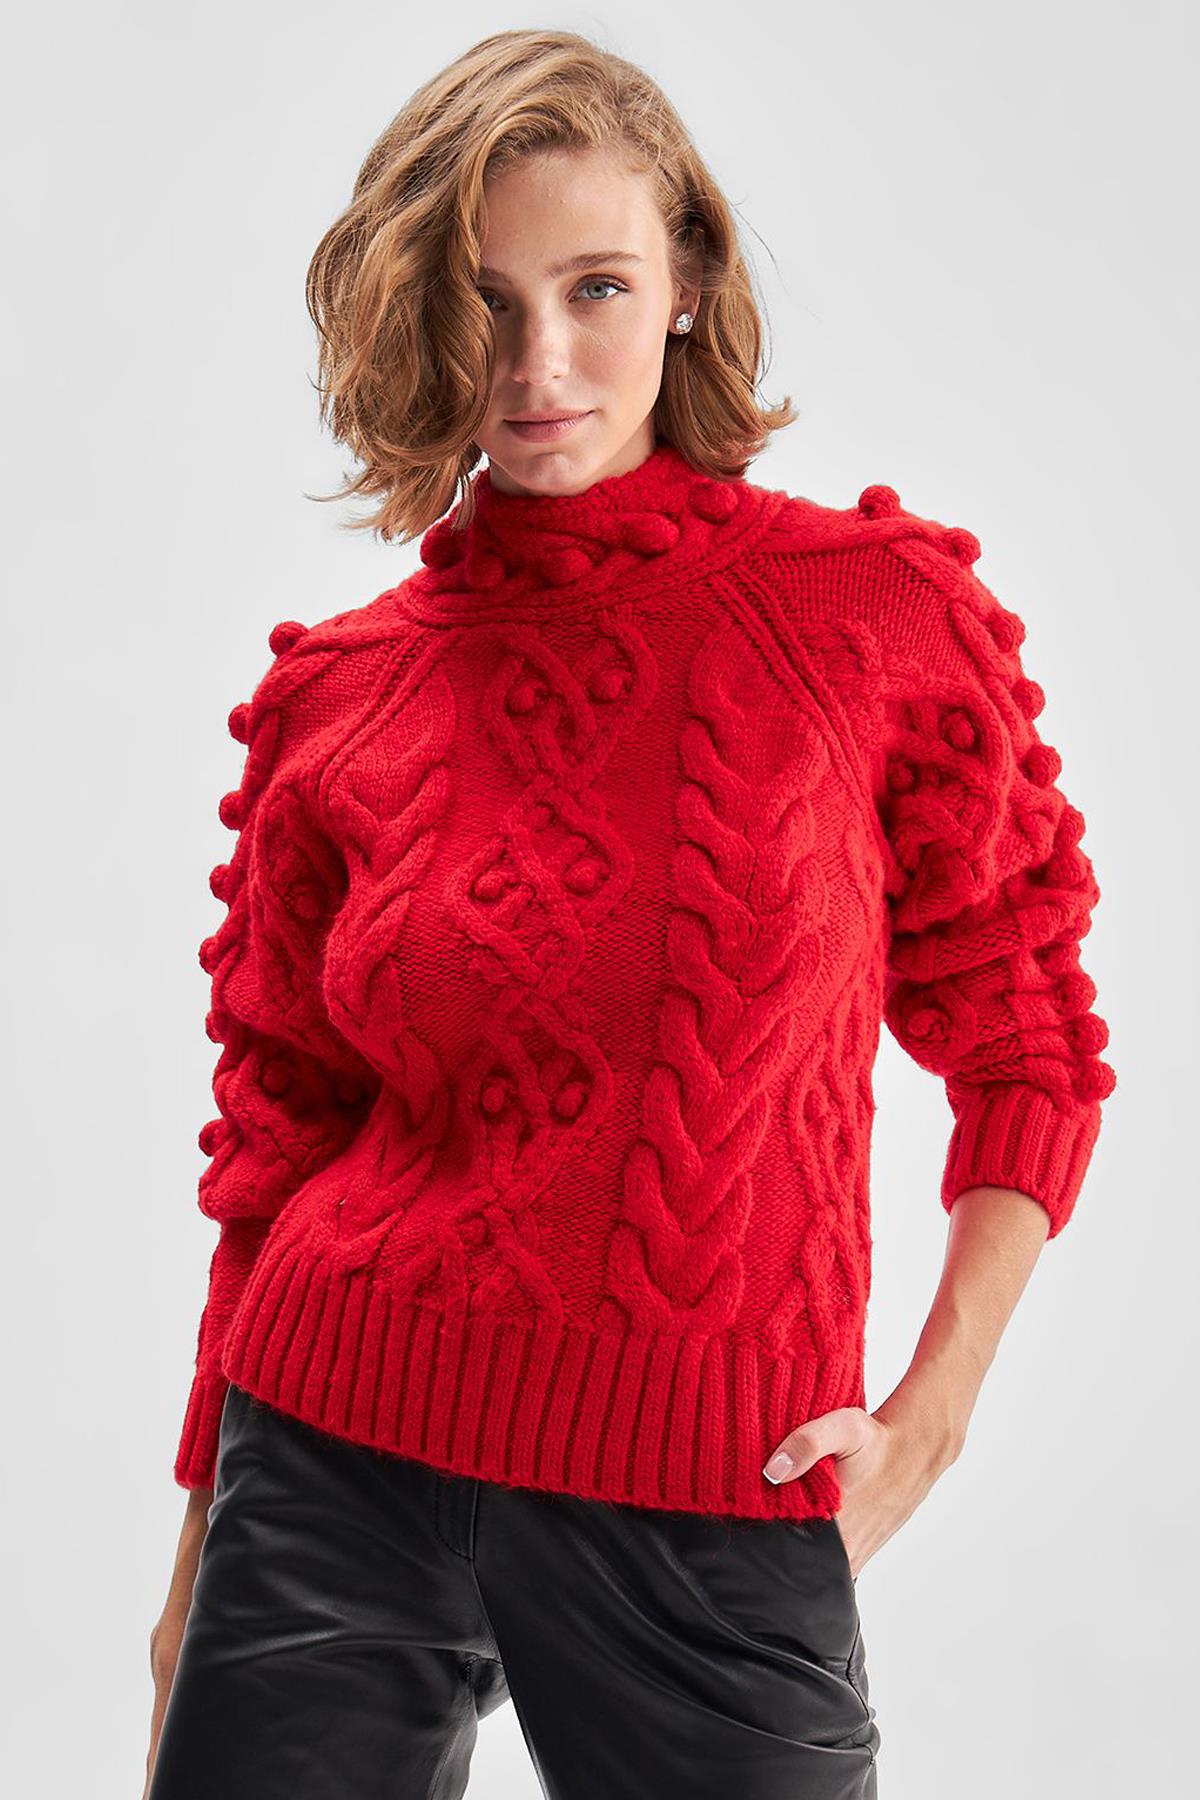 Back Detailed Cable Knit Pompom Red Knitwear Sweater